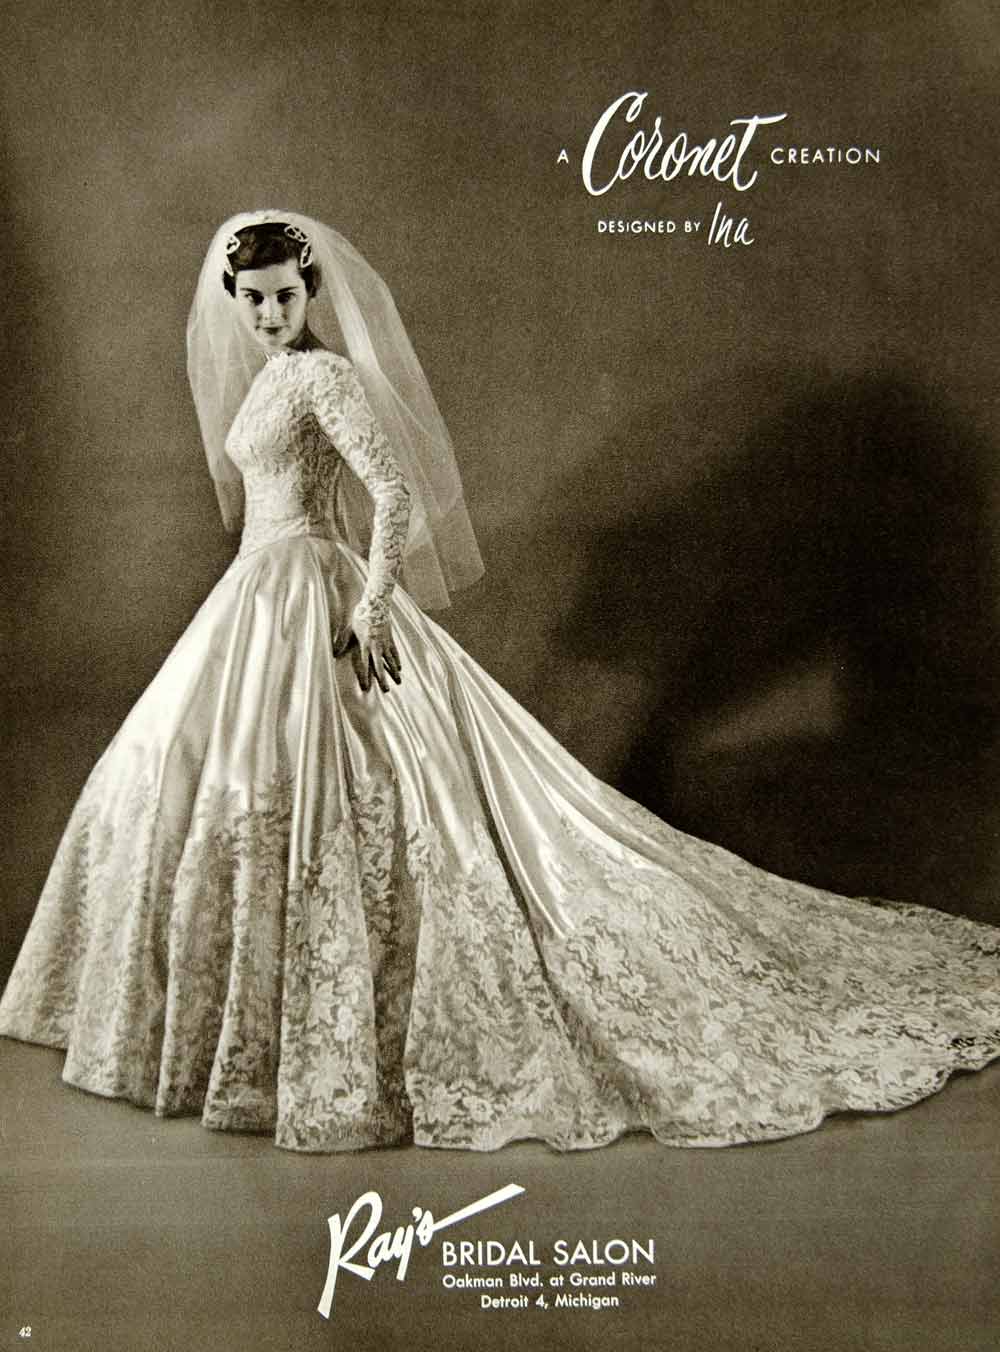 Vintage World and Haute Couture. - Chanel wedding dress worn by Betty  Garst, circa 1929